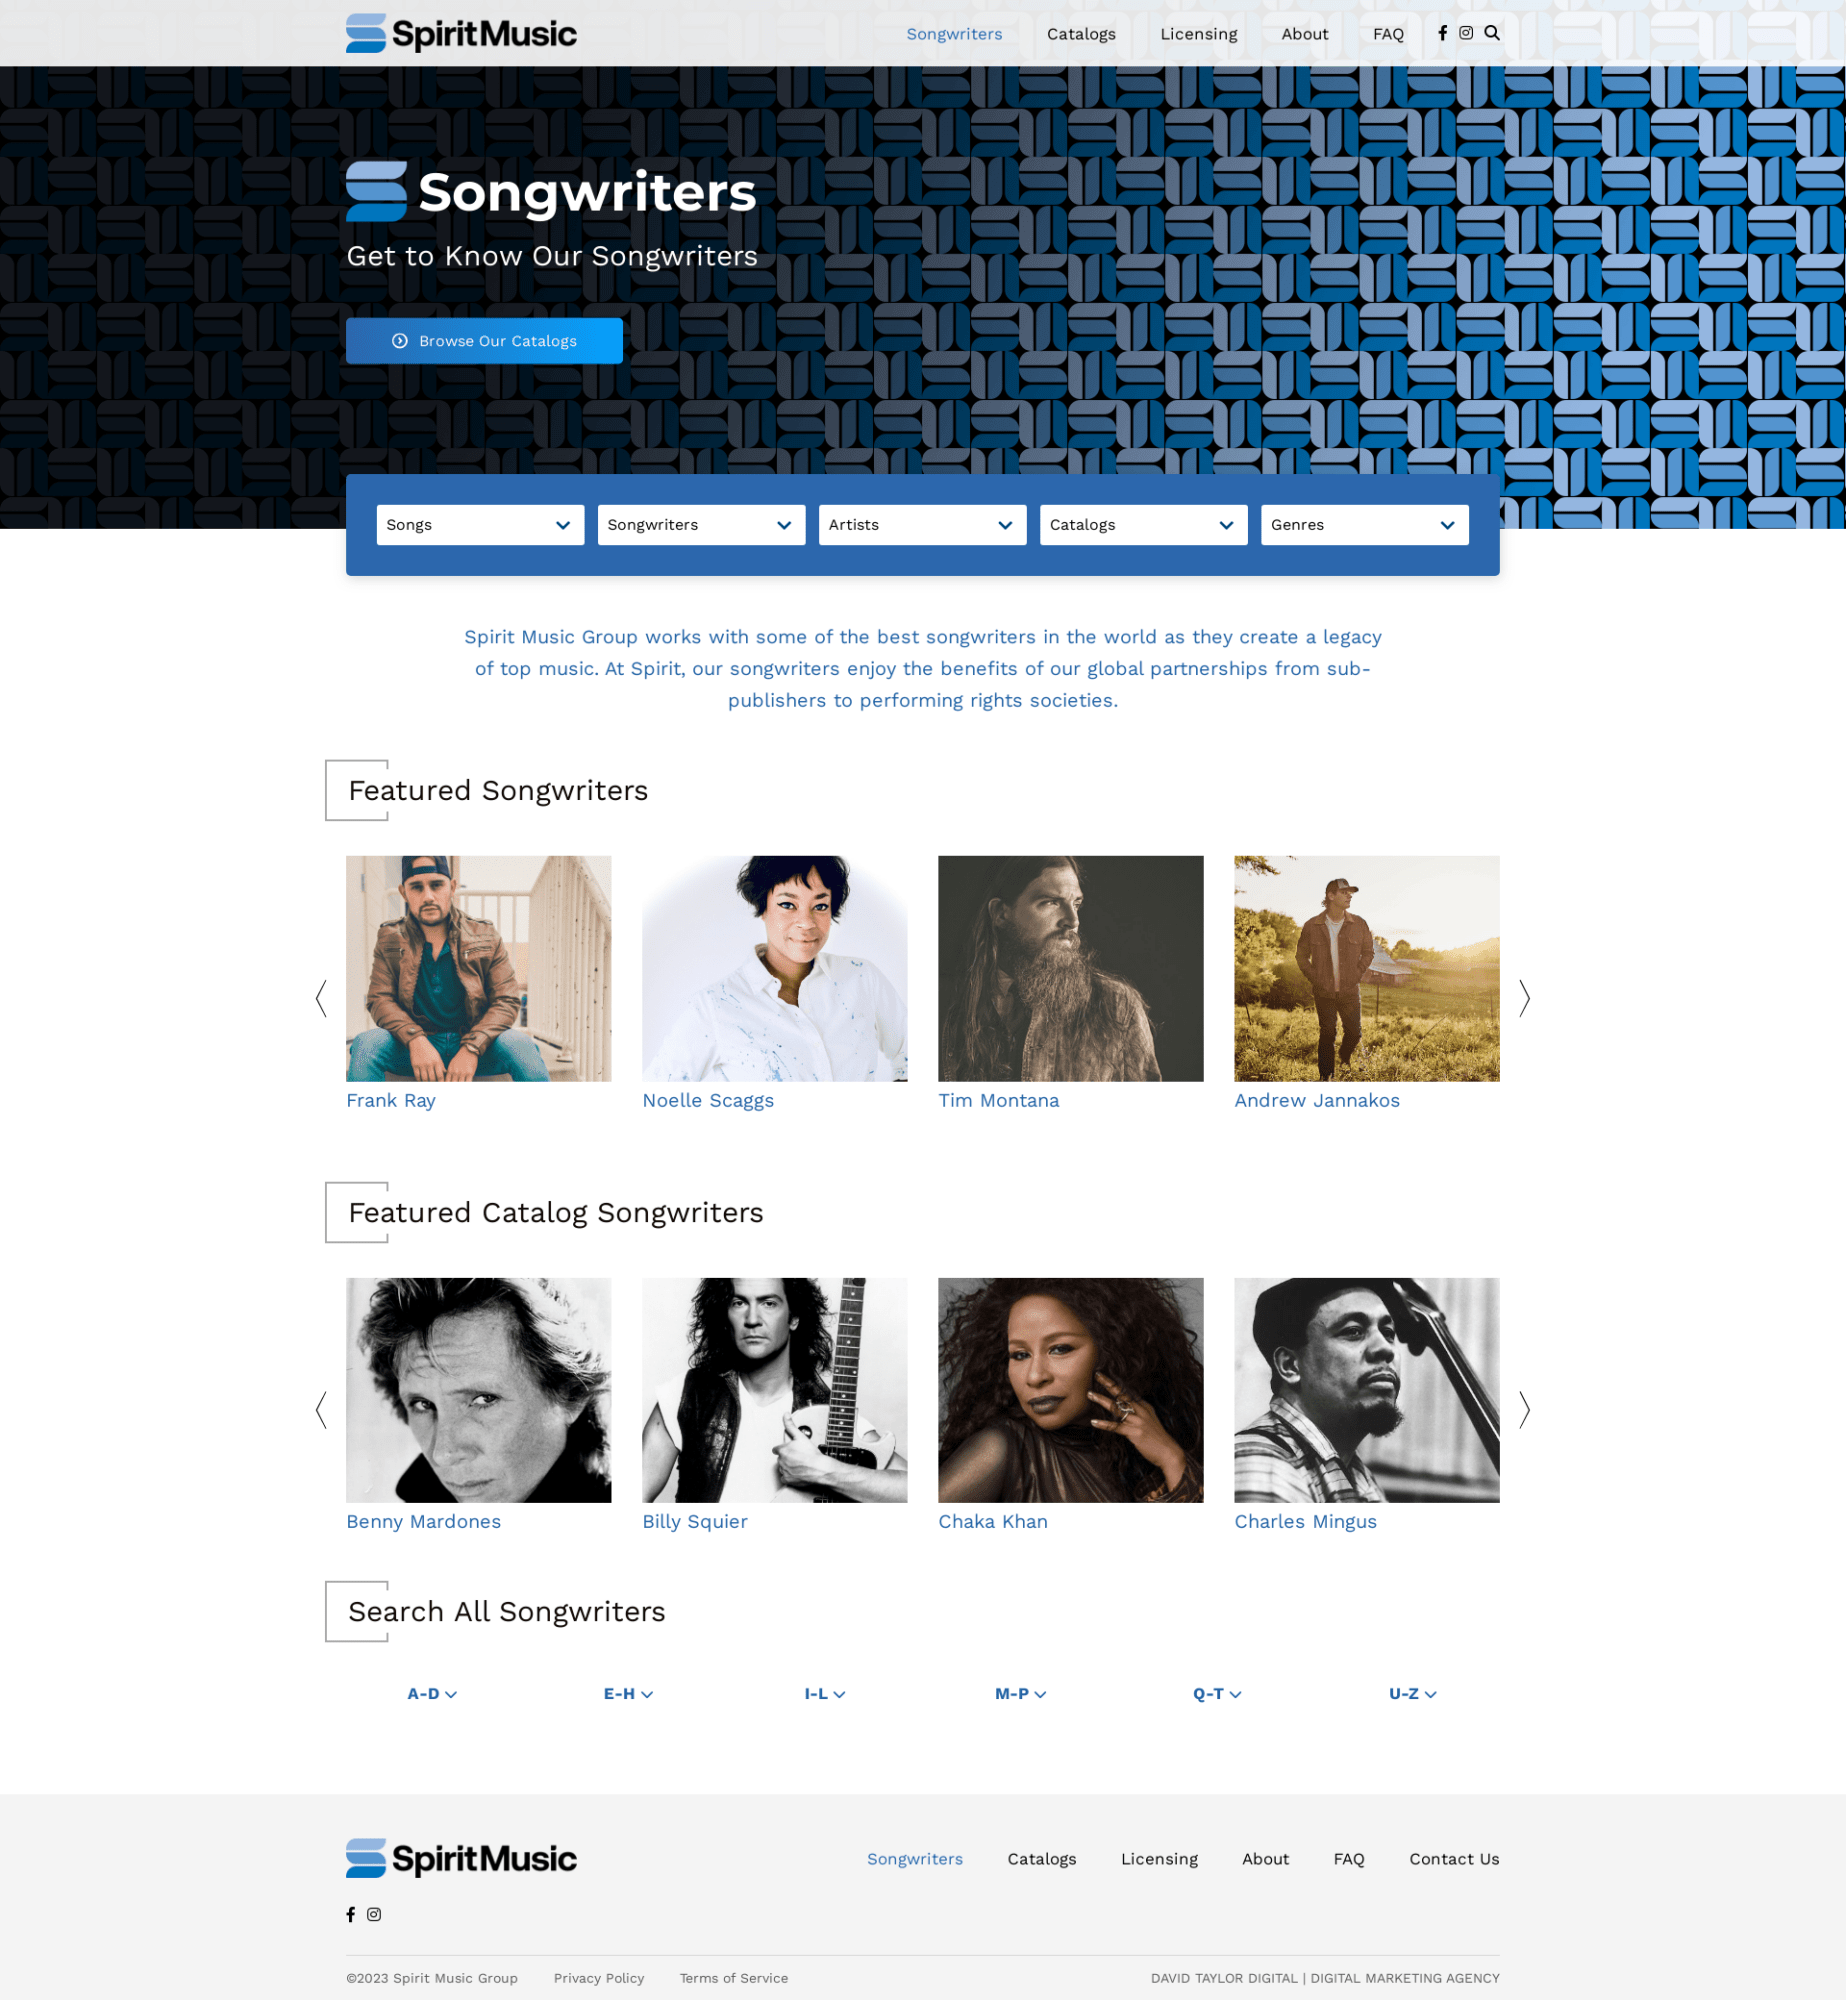 Spirit Music Group - Songwriters View